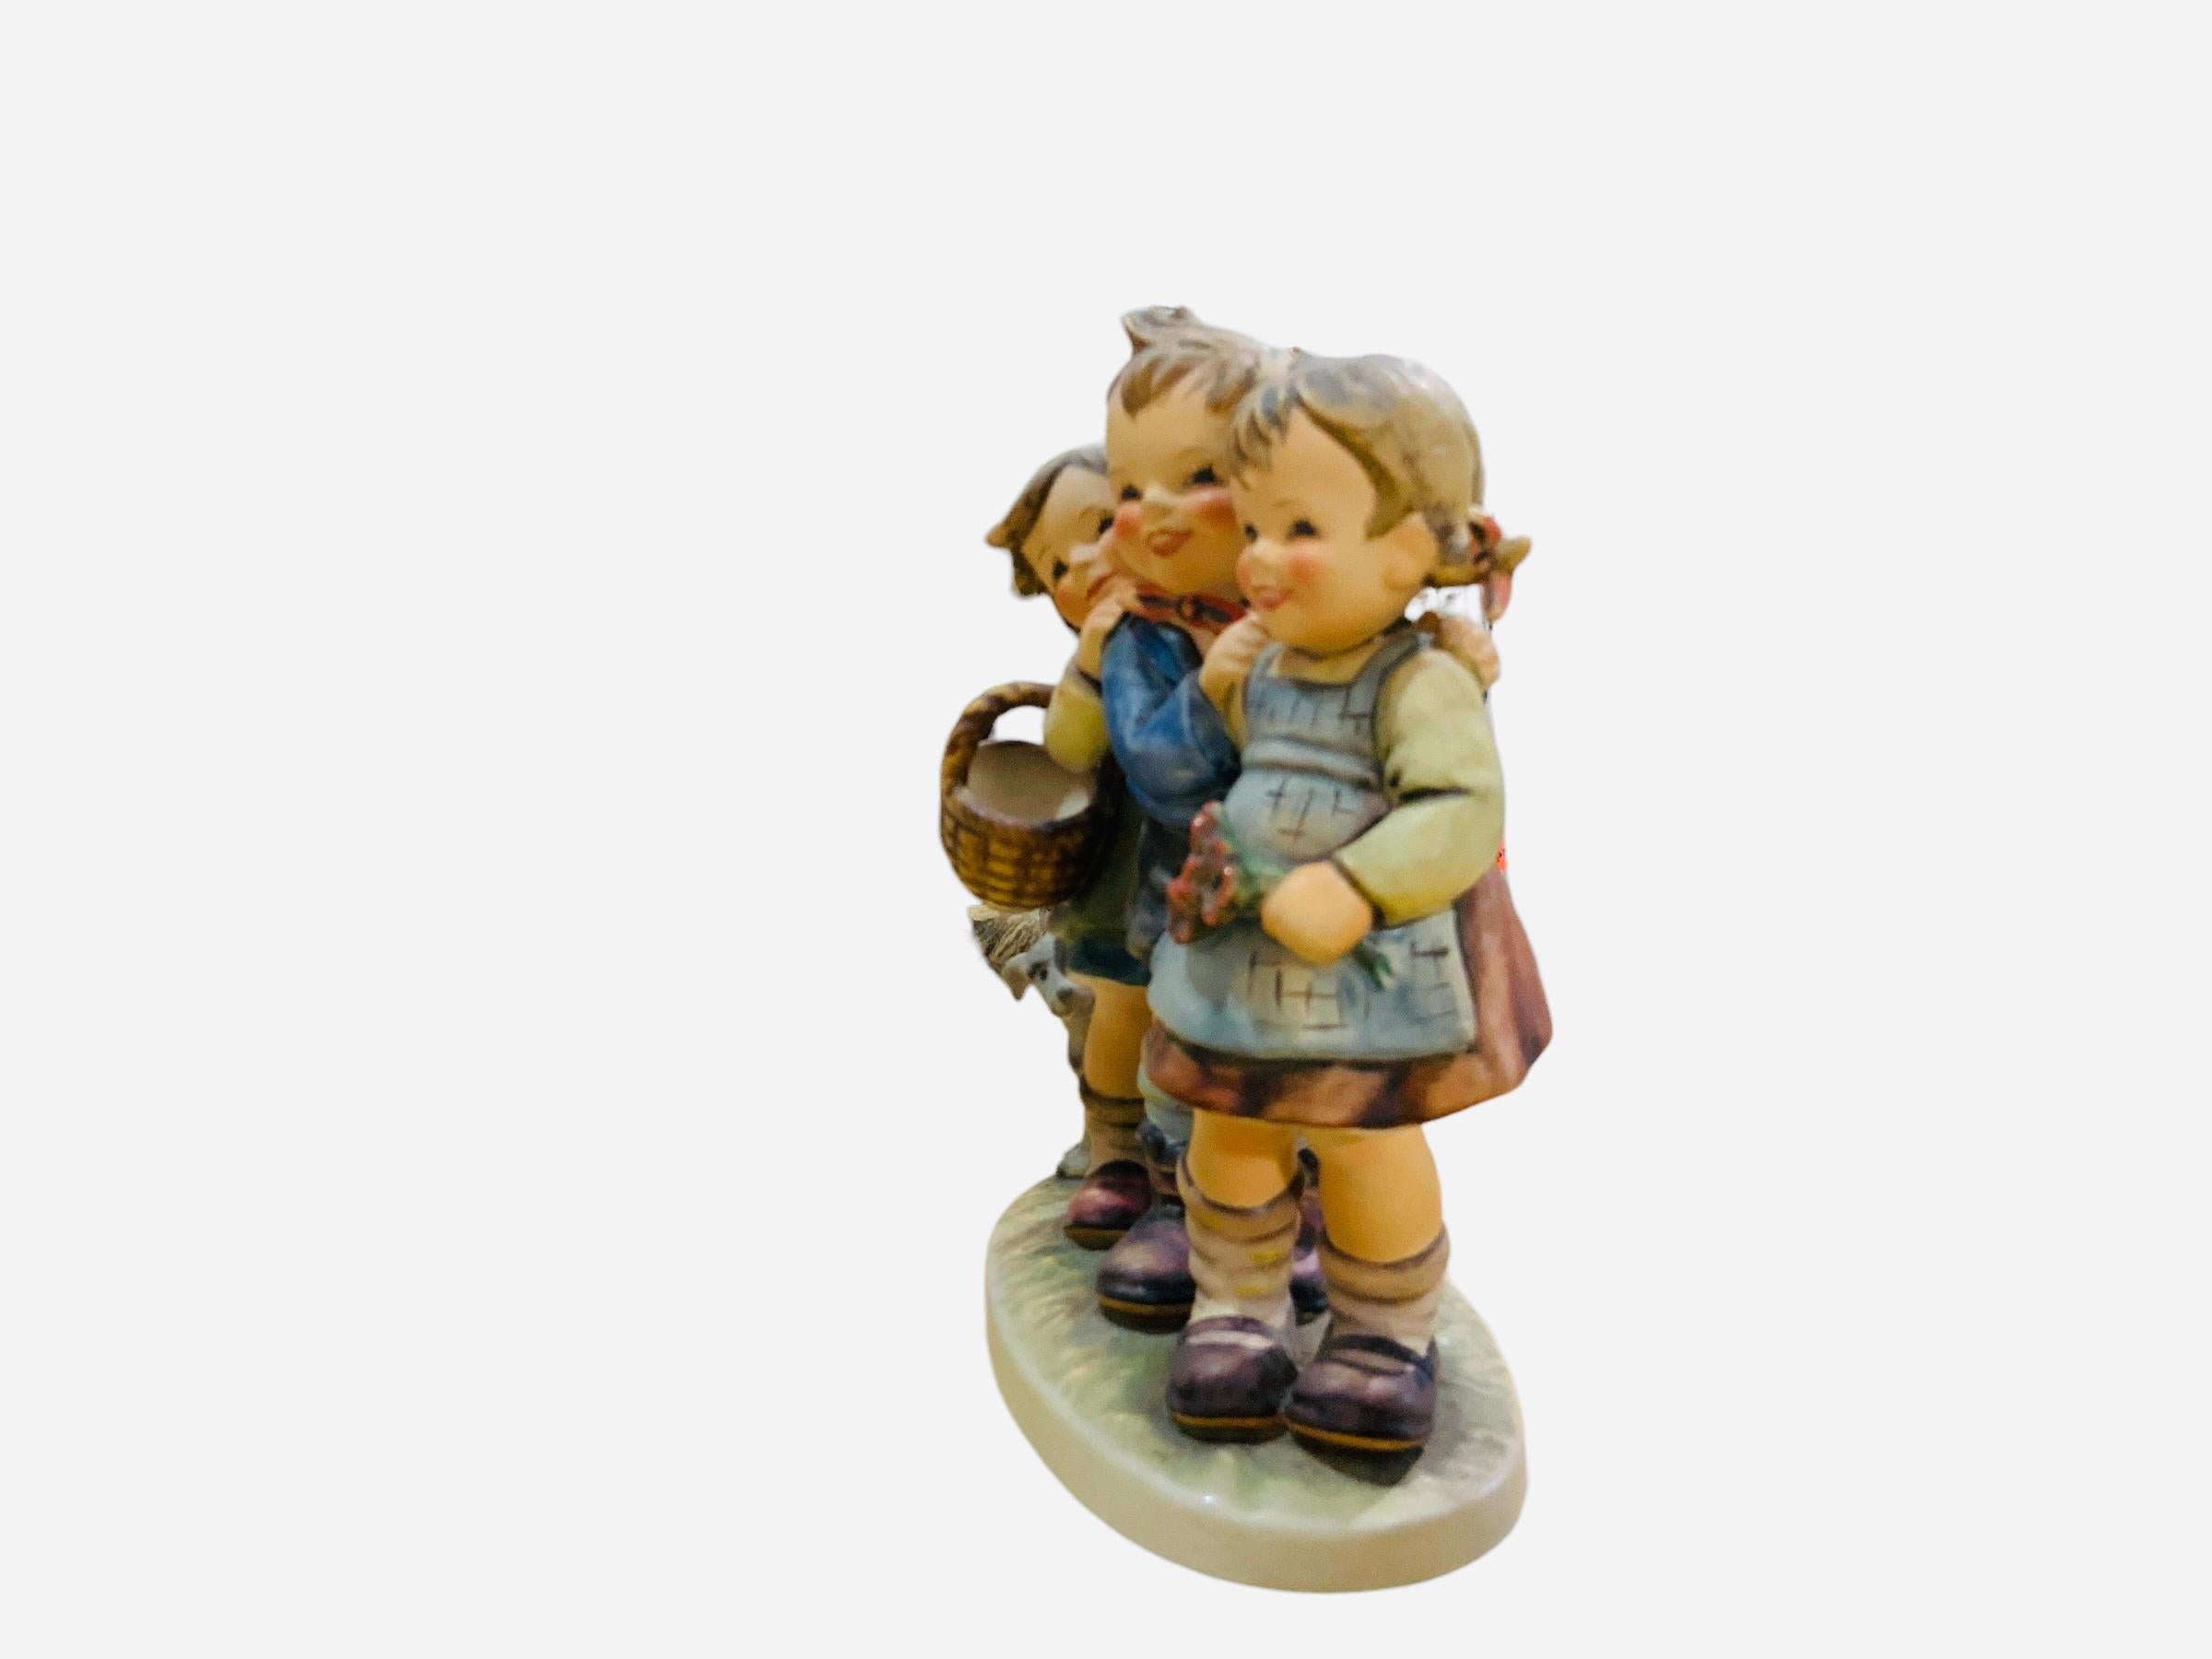 This is a Hummel porcelain group figurines of two girls and a boy. It’s named “Follow the Leader”. Its mark is TMK5 (1970’s). The inscription M.I. Hummel is in the back of the figurine. The trademark of Goebel company is below the base with the #369